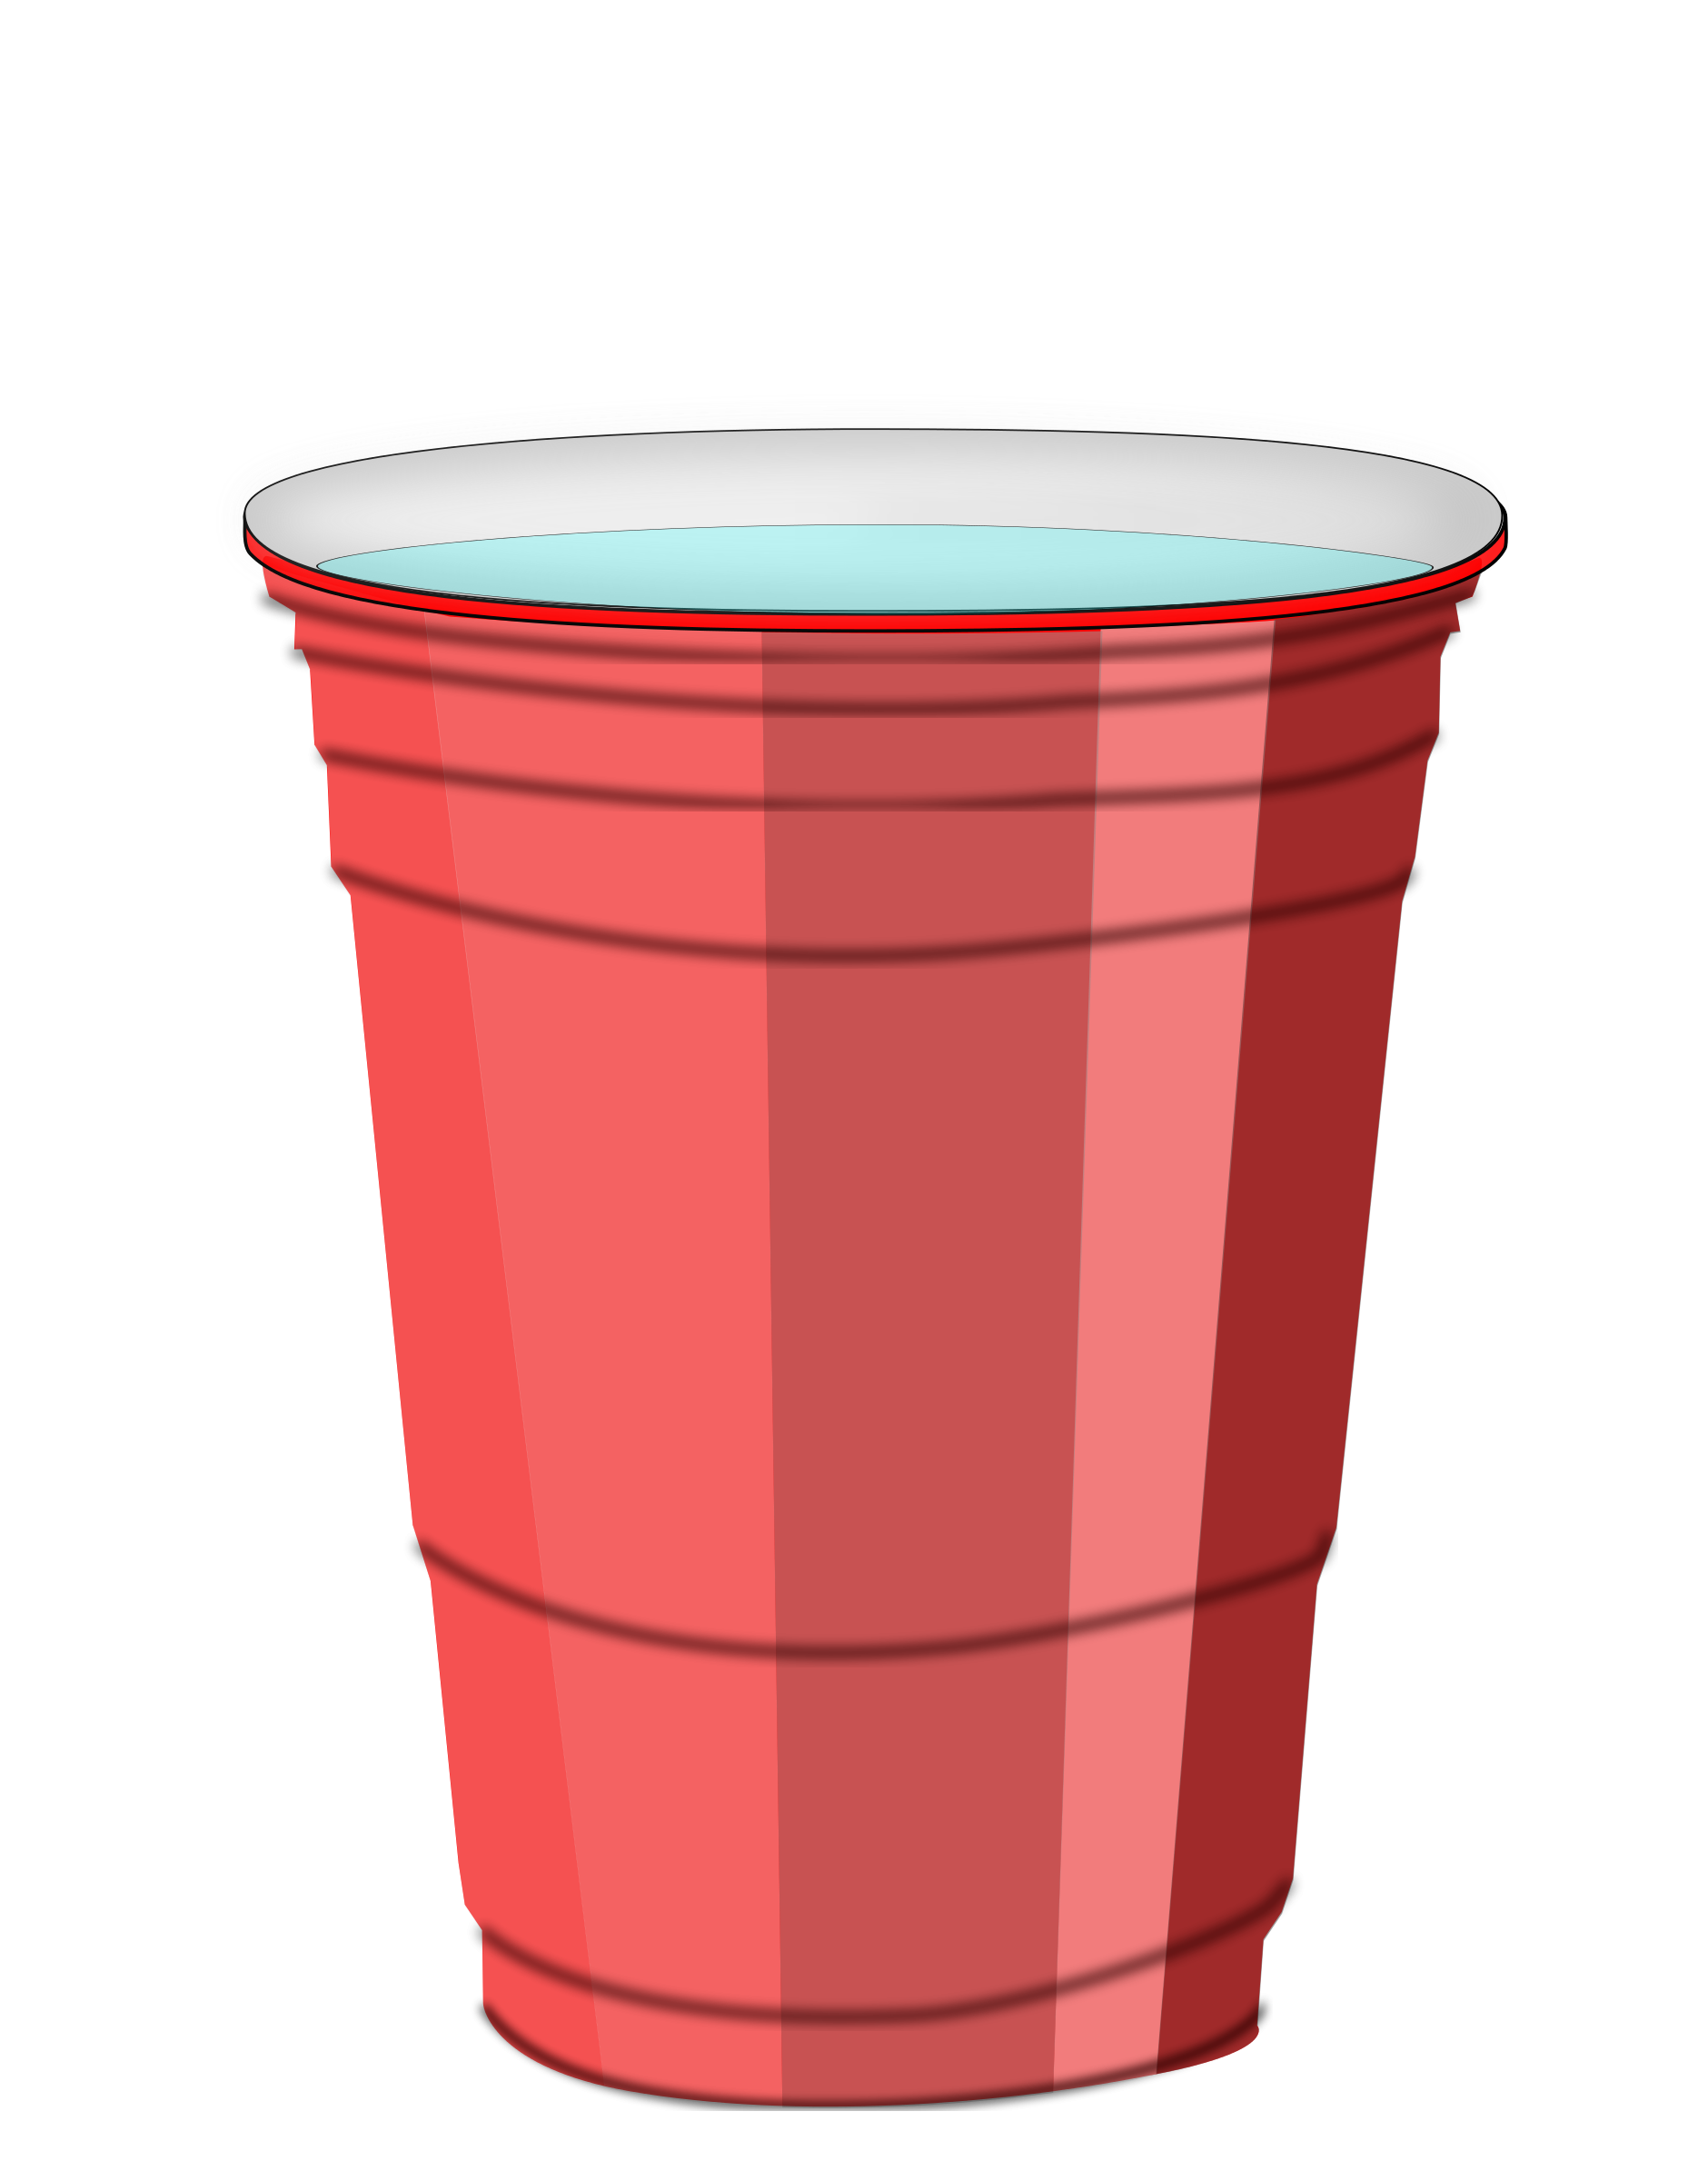 Red solo cup.